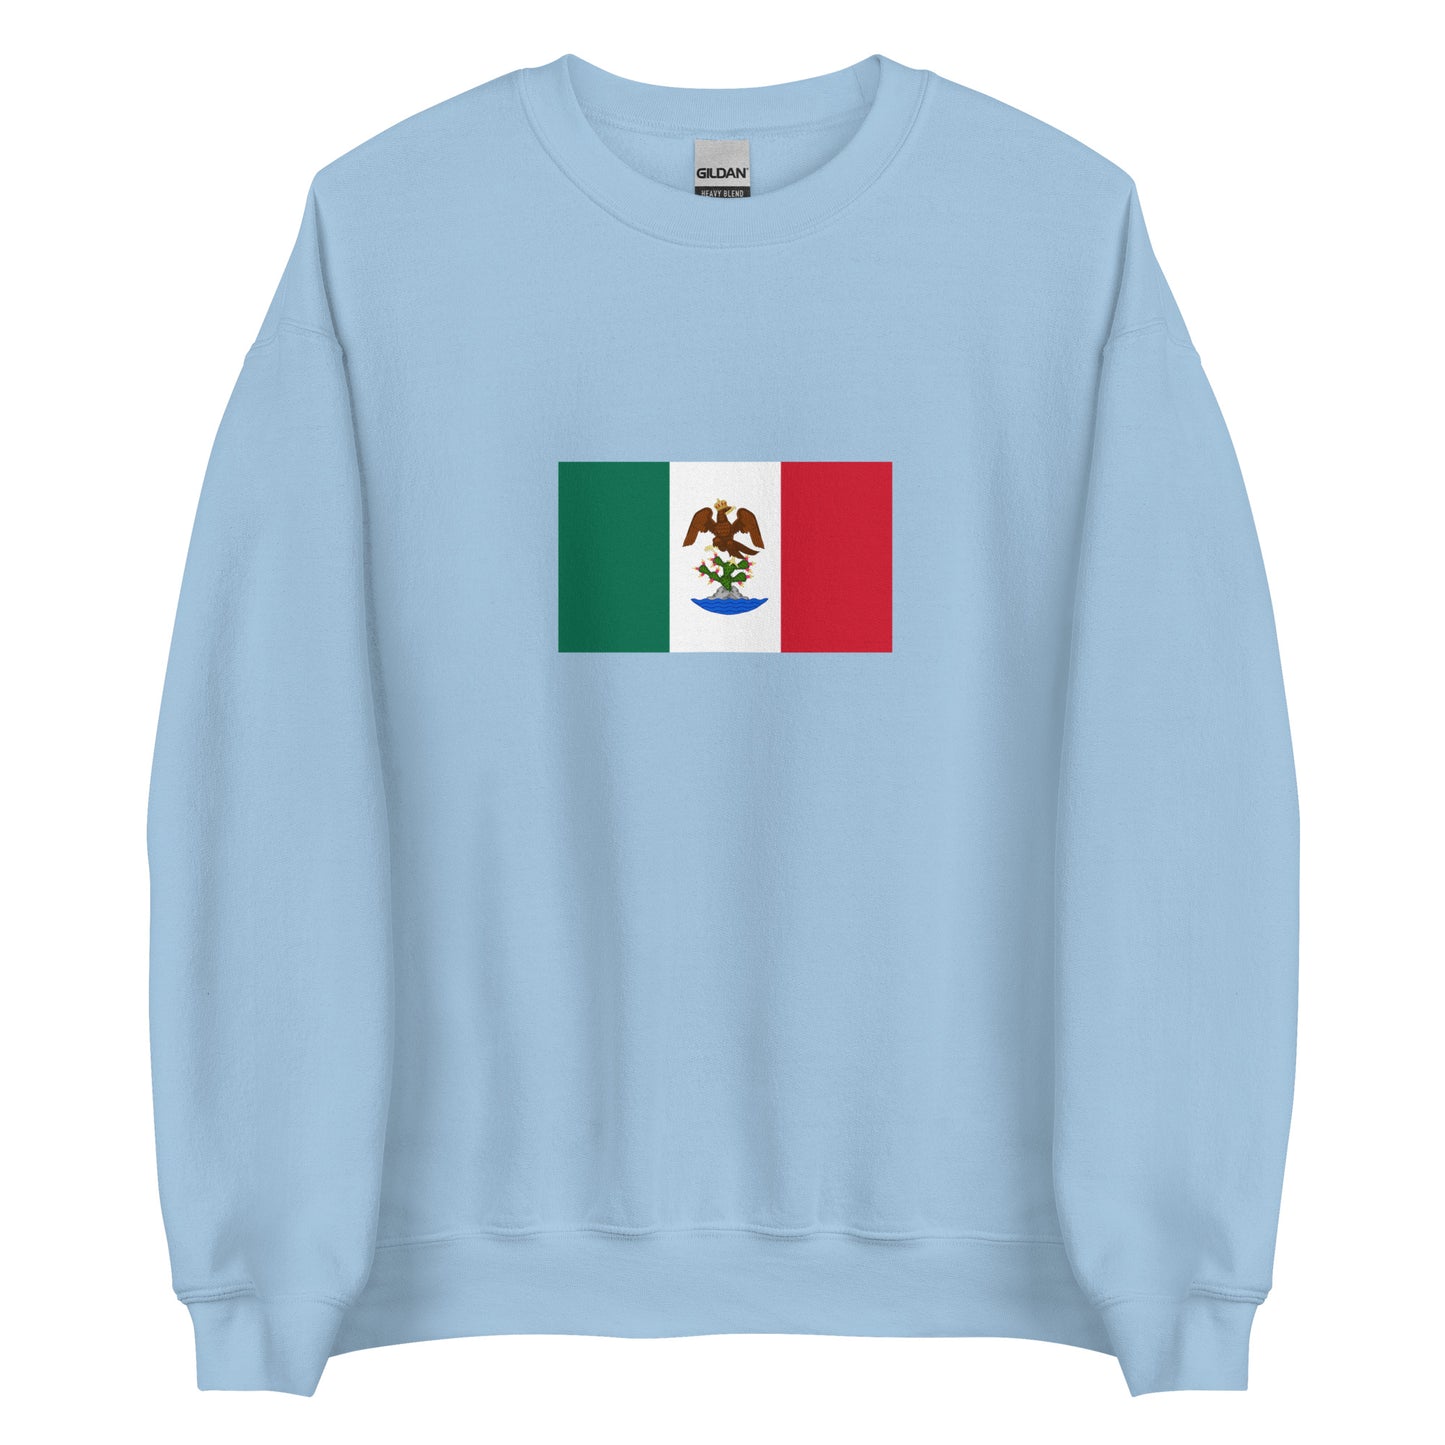 First Mexican Empire (1821-1823) | Mexico Flag Interactive History Sweatshirt